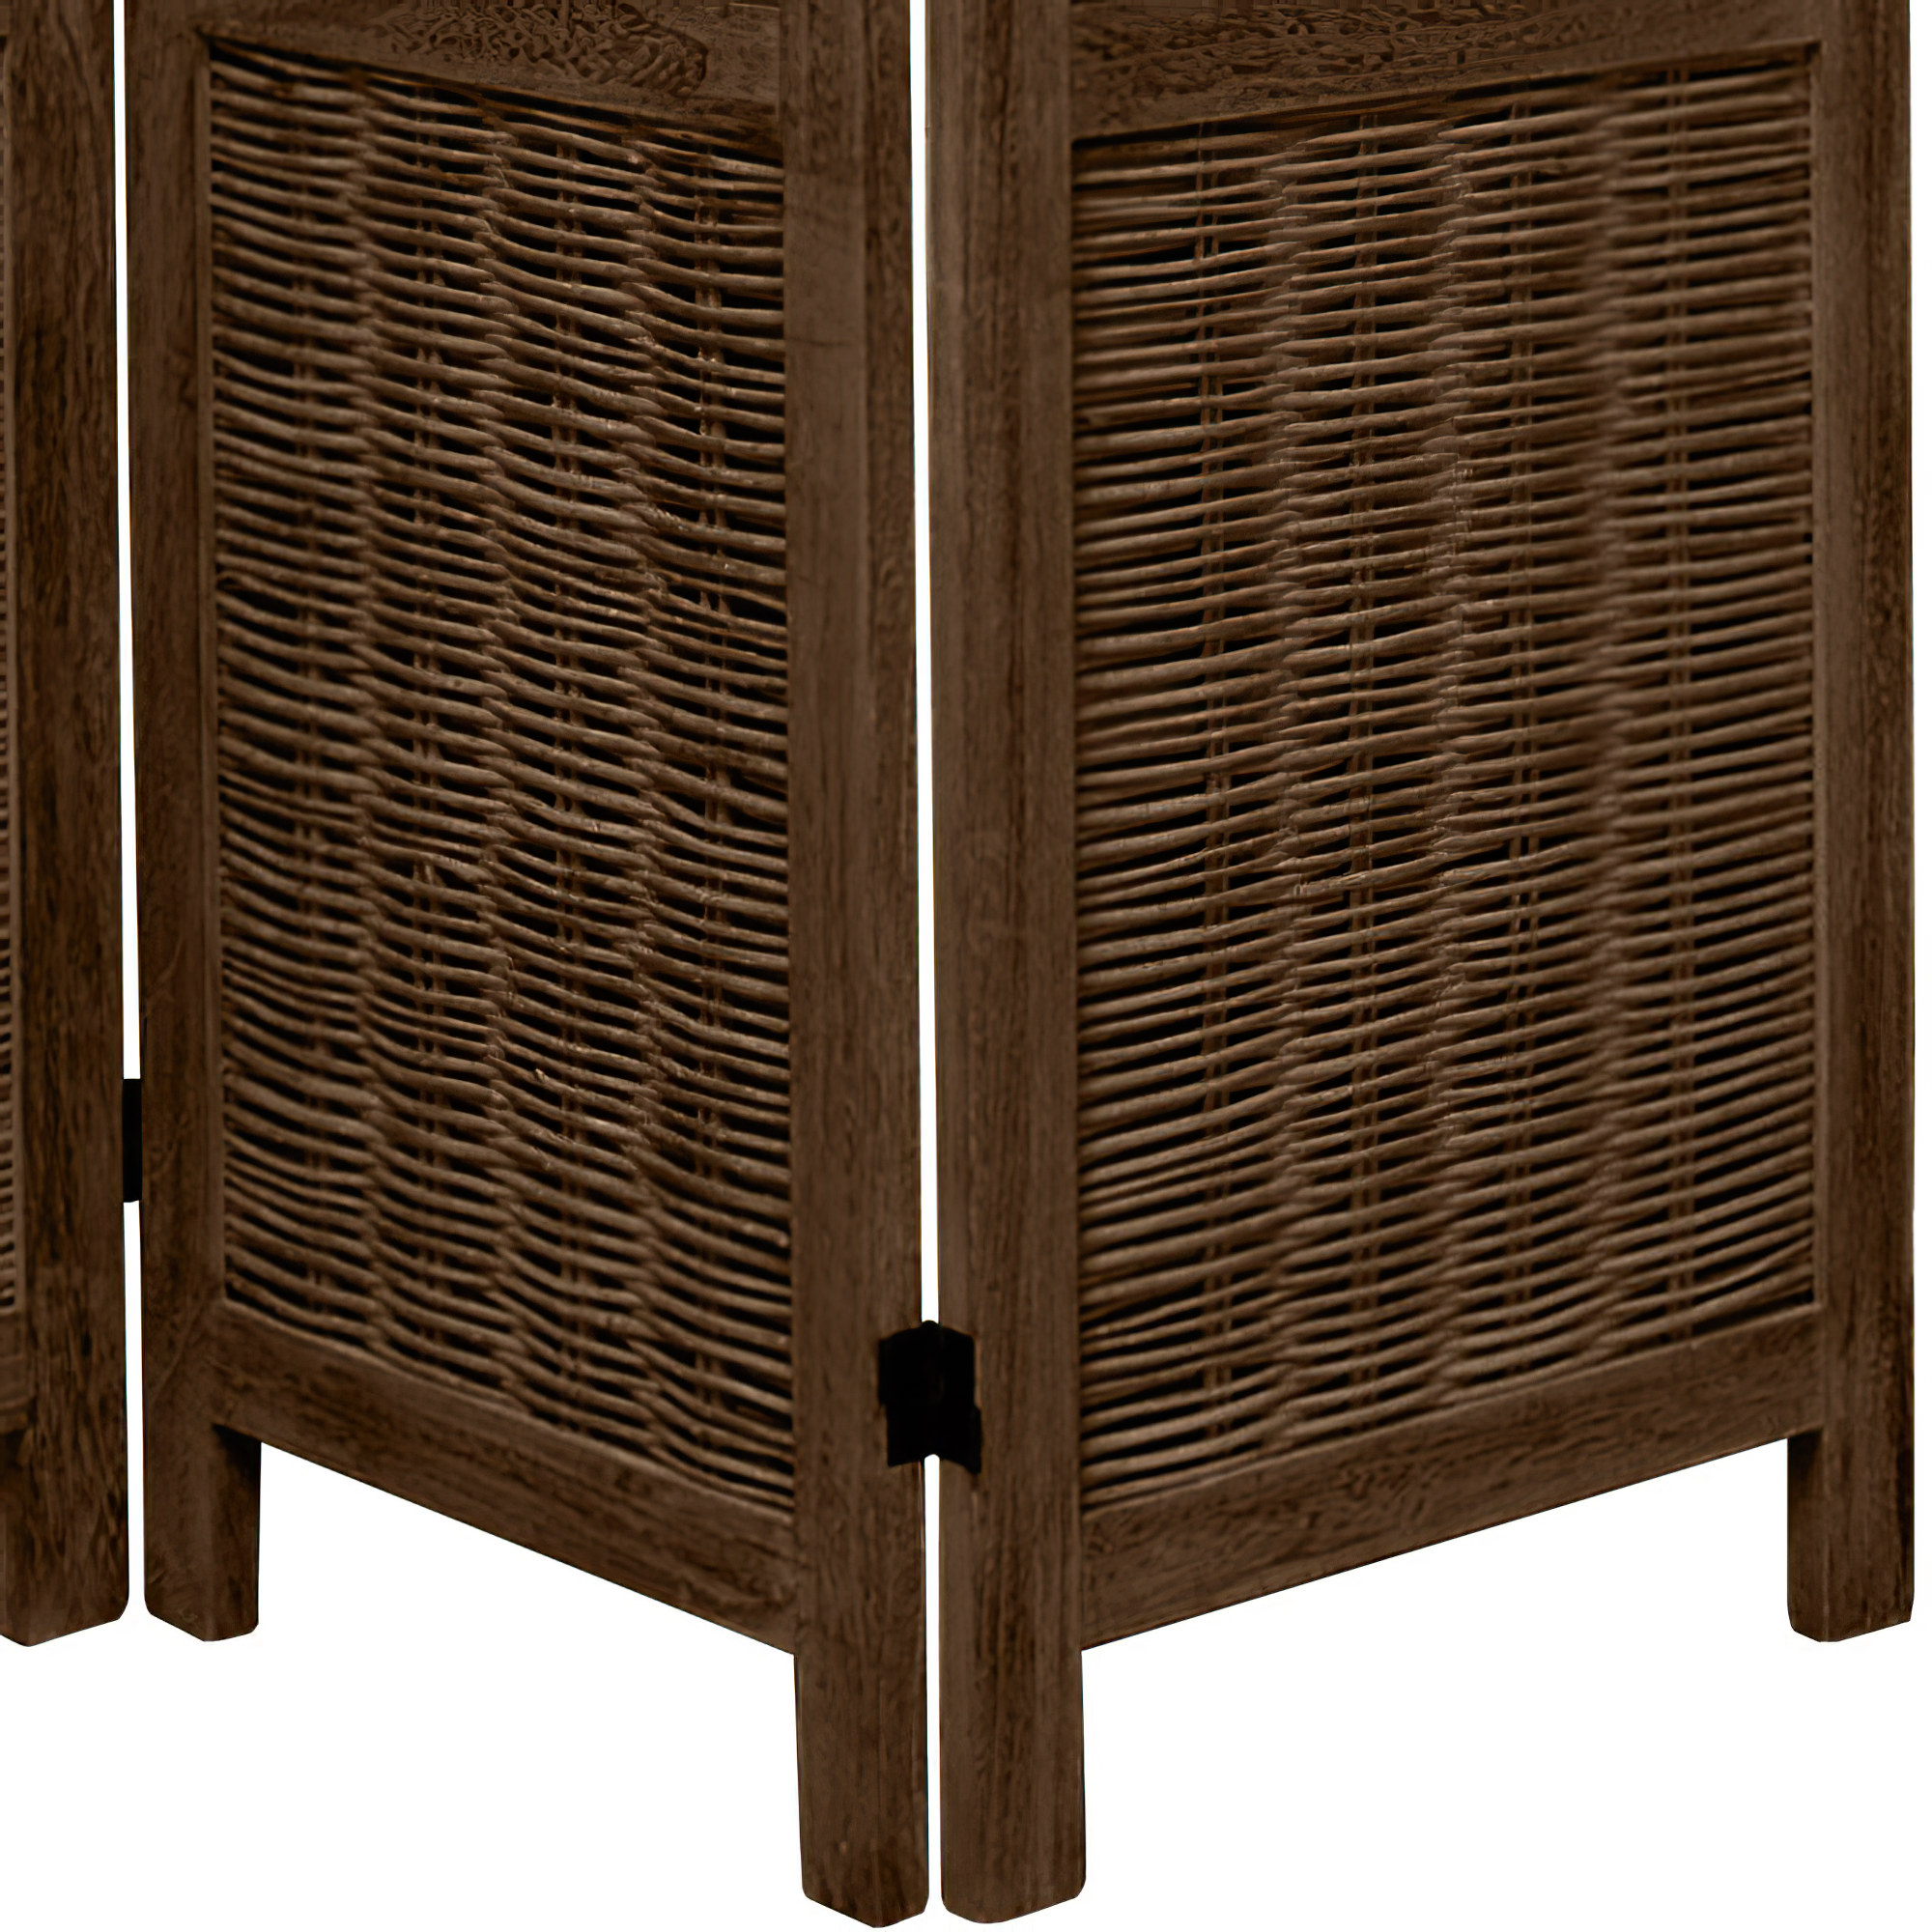 Oriental Furniture 5 1/2 ft. Tall Bamboo Matchstick Screen - Brown - 4 Panel - image 3 of 3